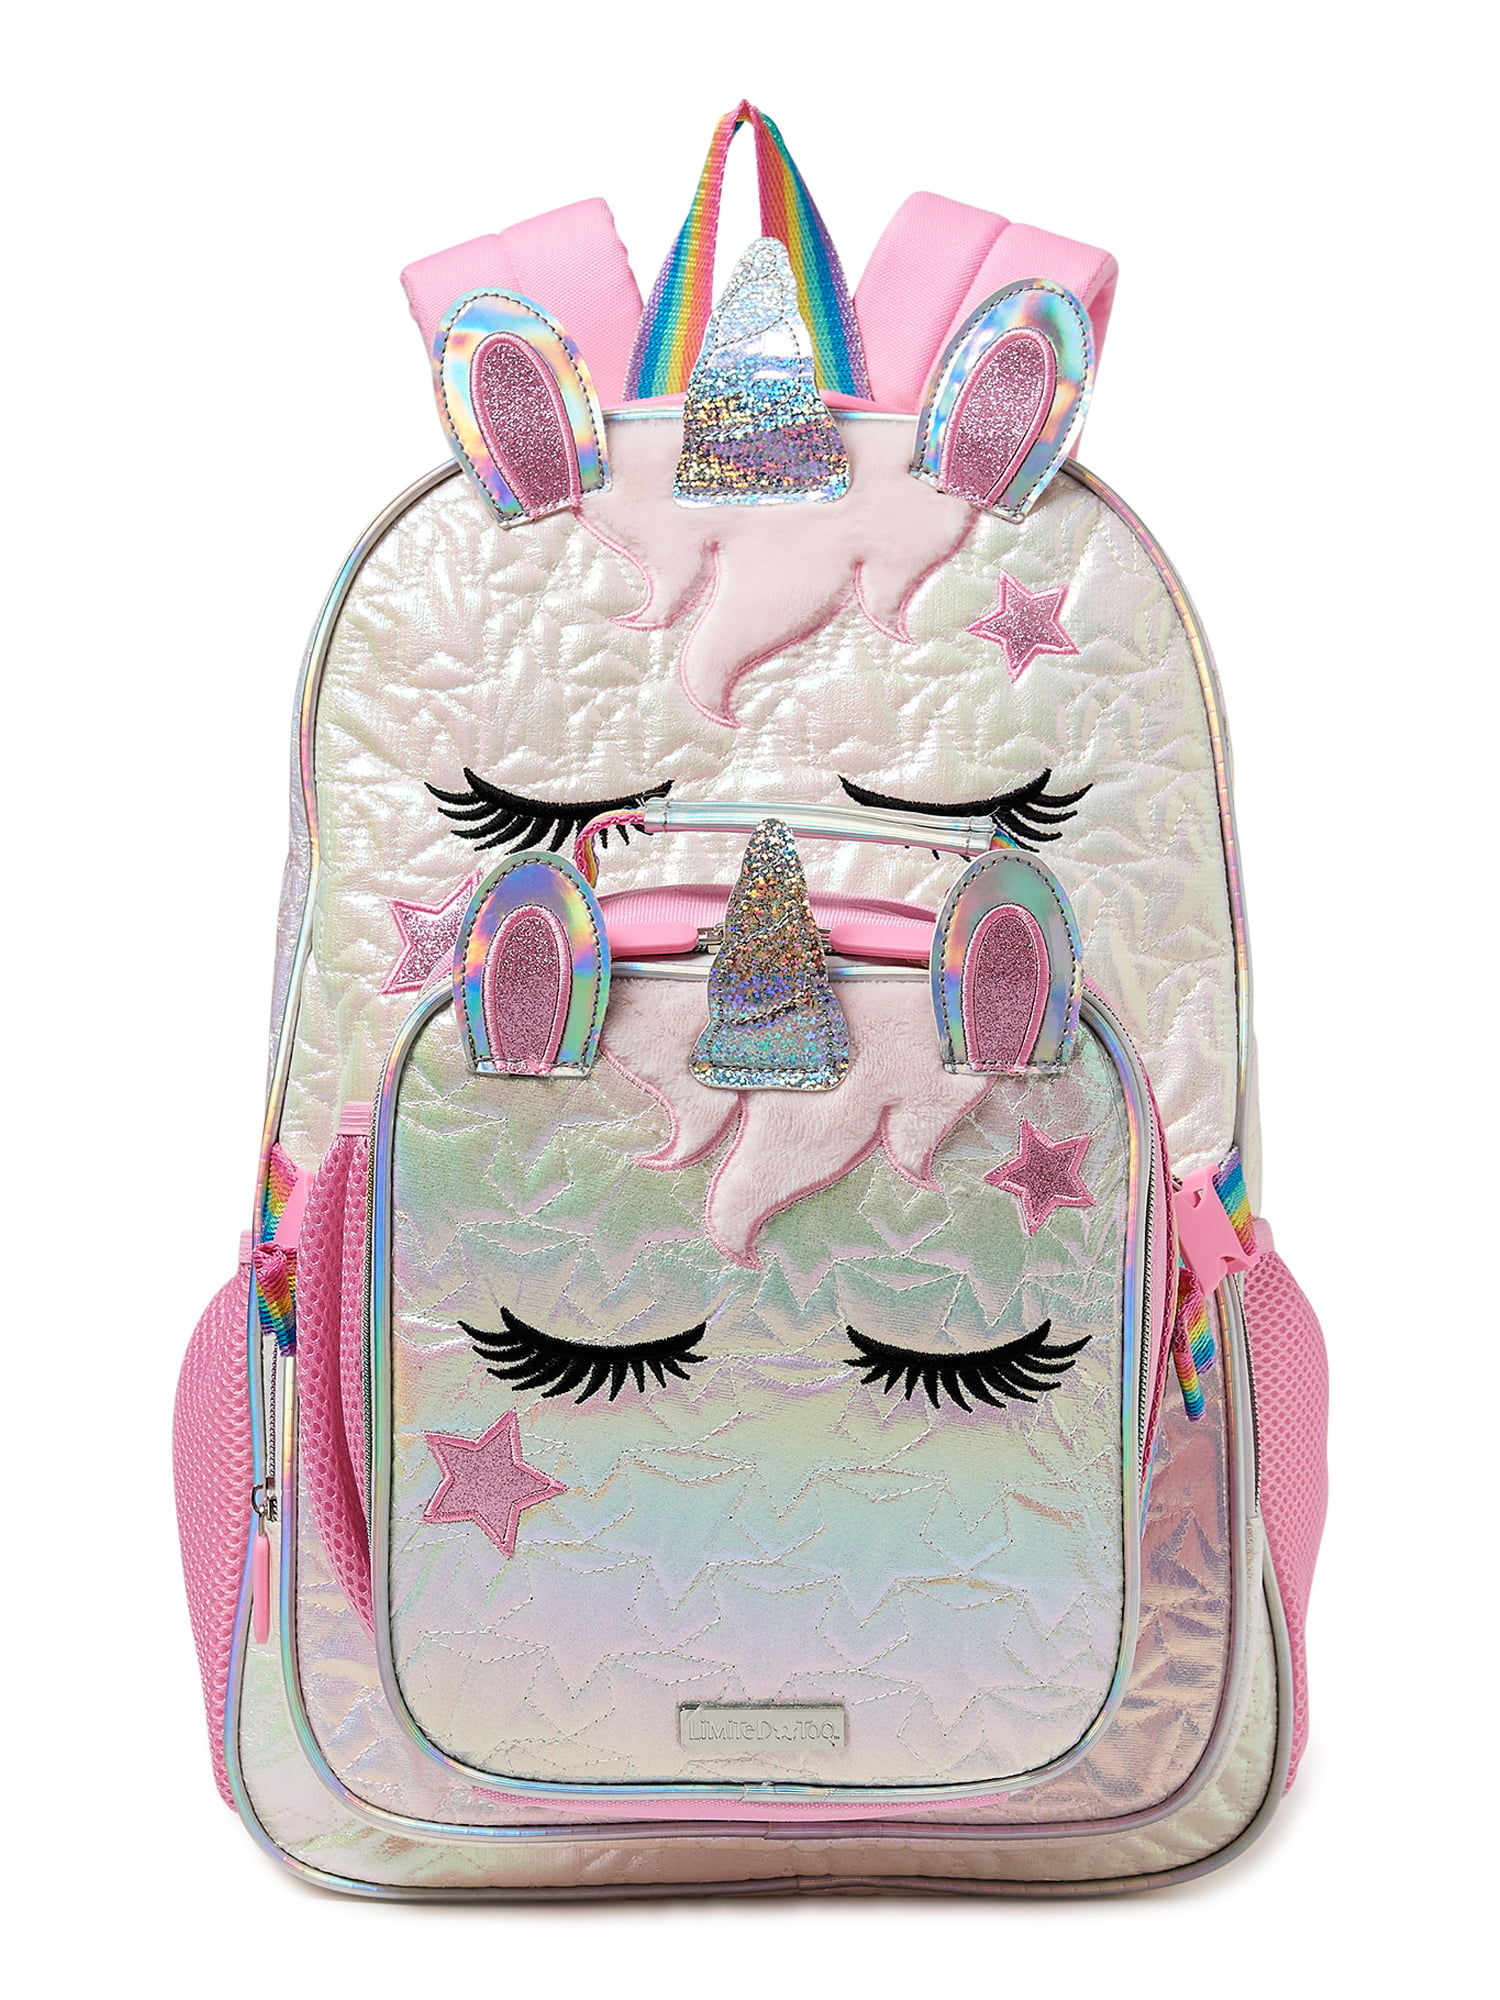 17 Inch Simple Backpacks for Teens Beautiful Unicorn Pattern Comfortable Laptop Daypack with Adjustable Padded Shoulder Straps 